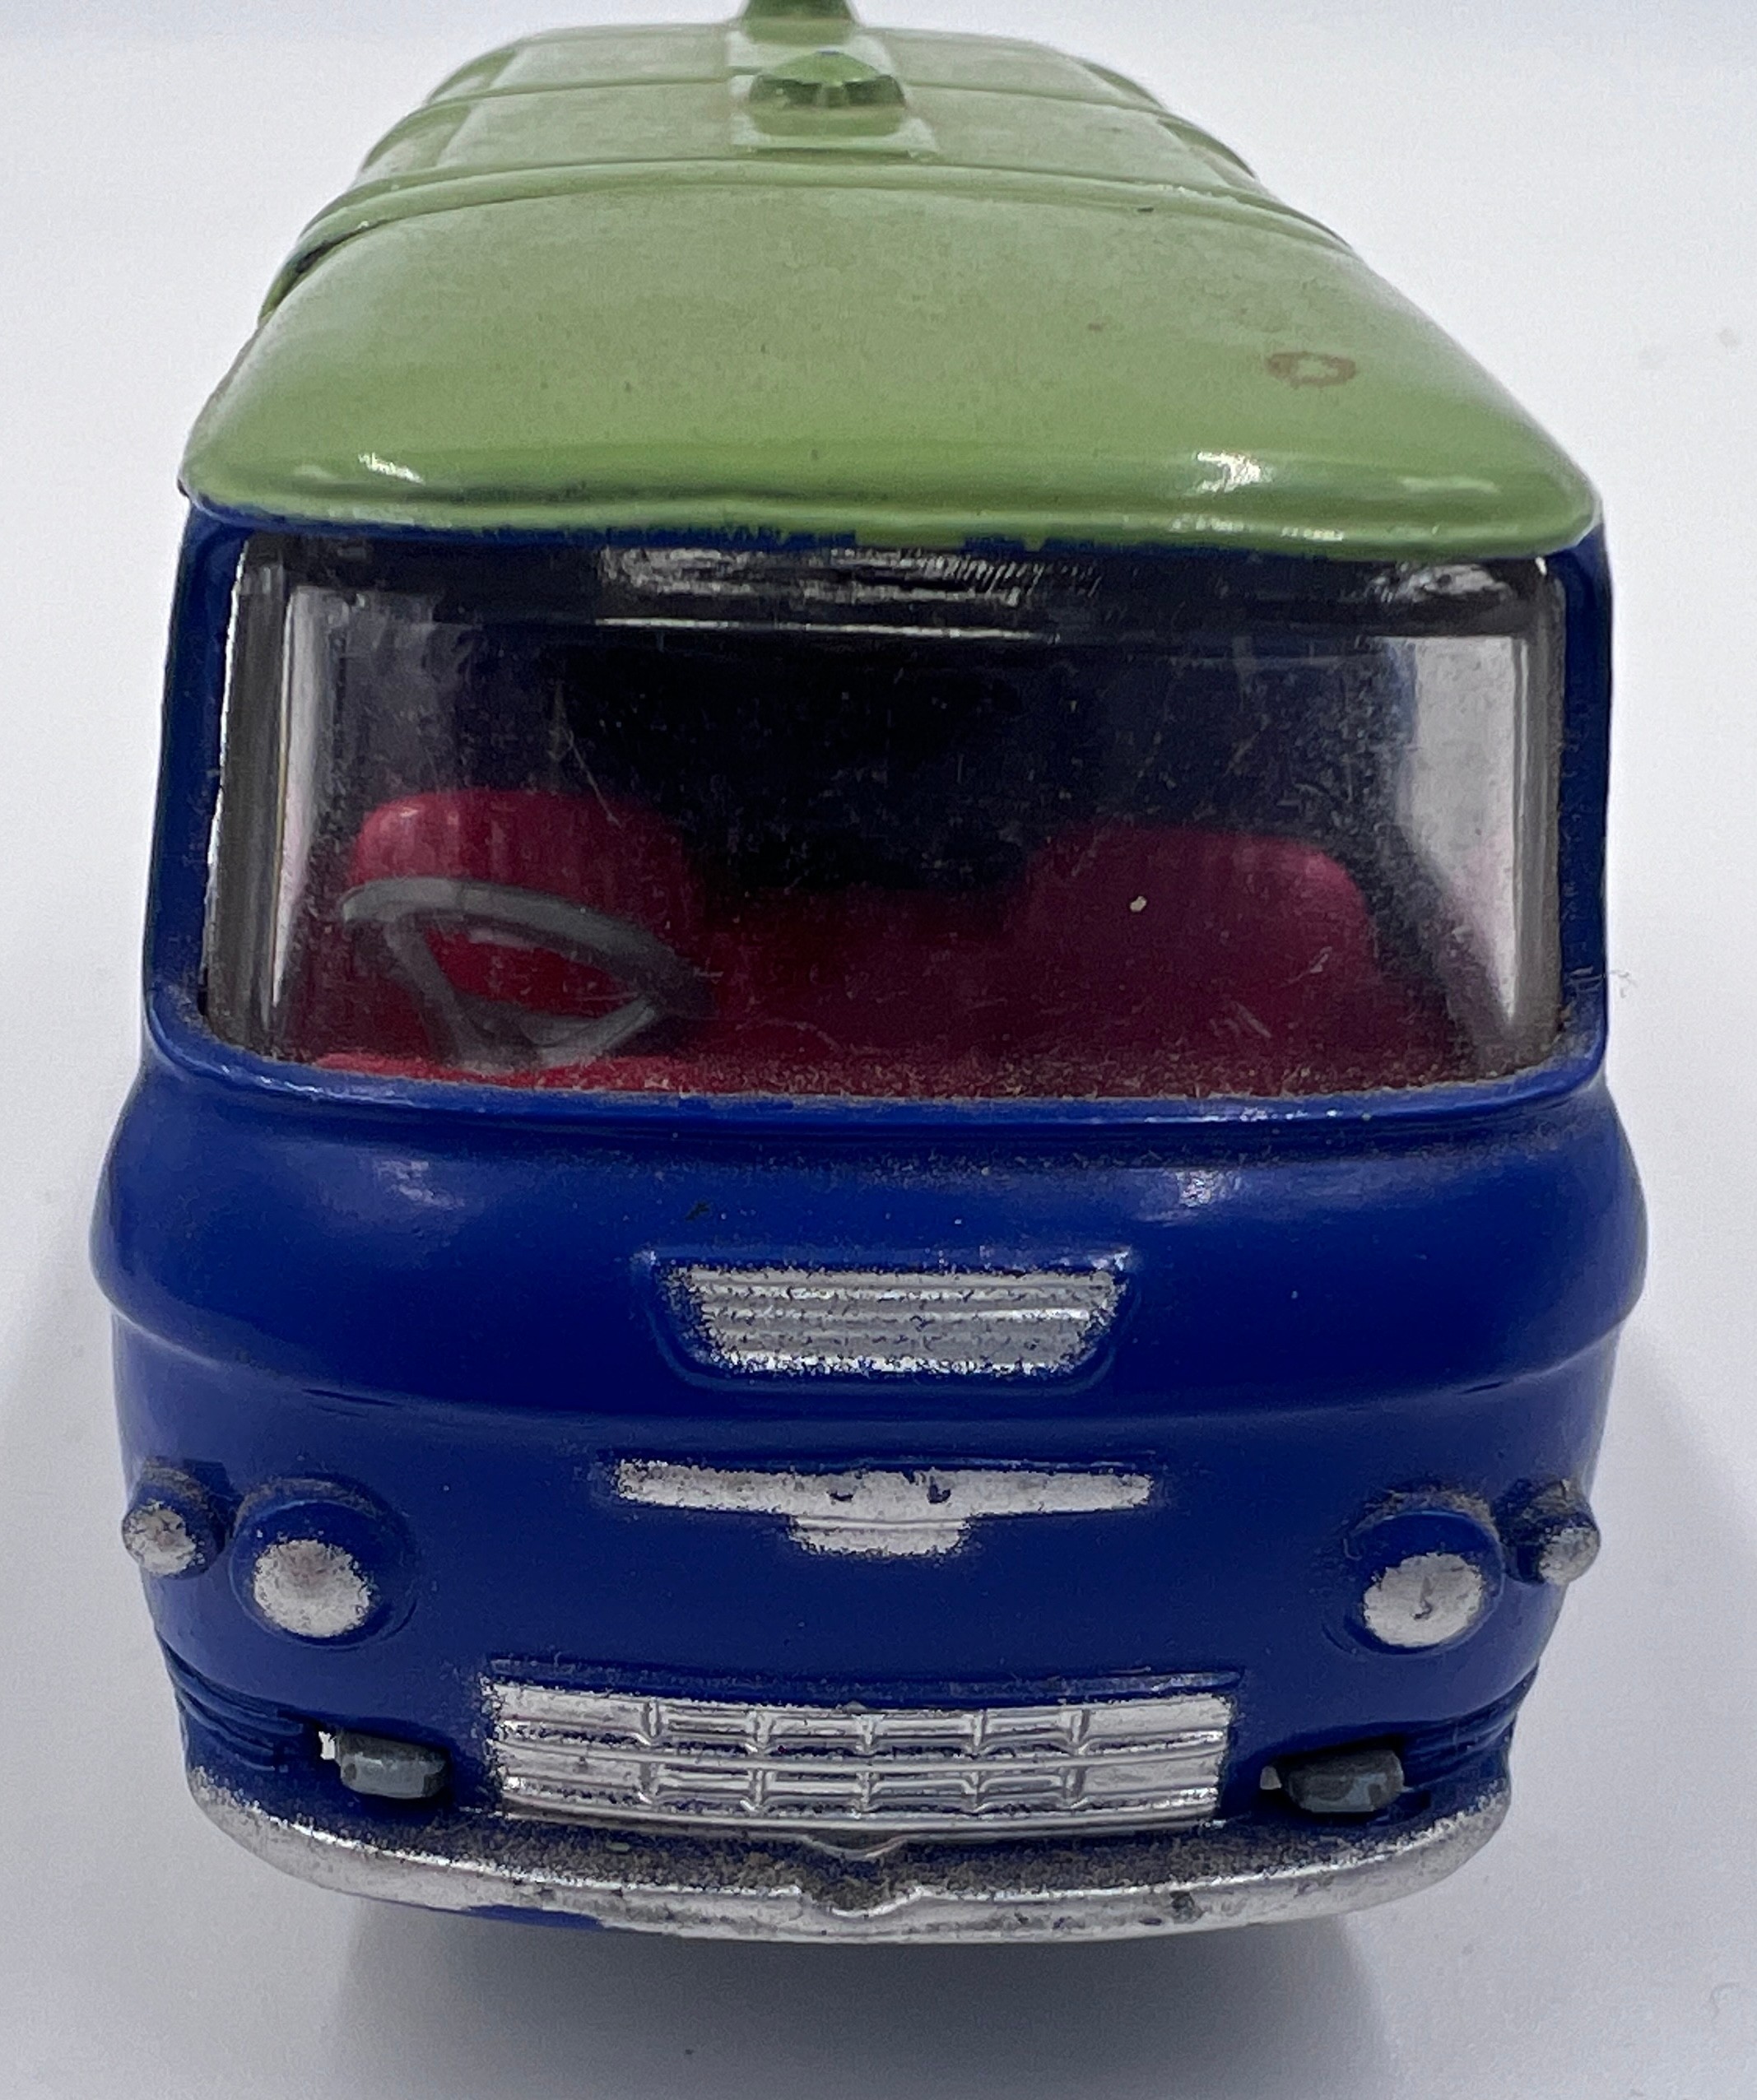 Corgi 462 Commer "Hammonds" Promotional Van in original box - finished in blue with a green roof, - Image 5 of 10